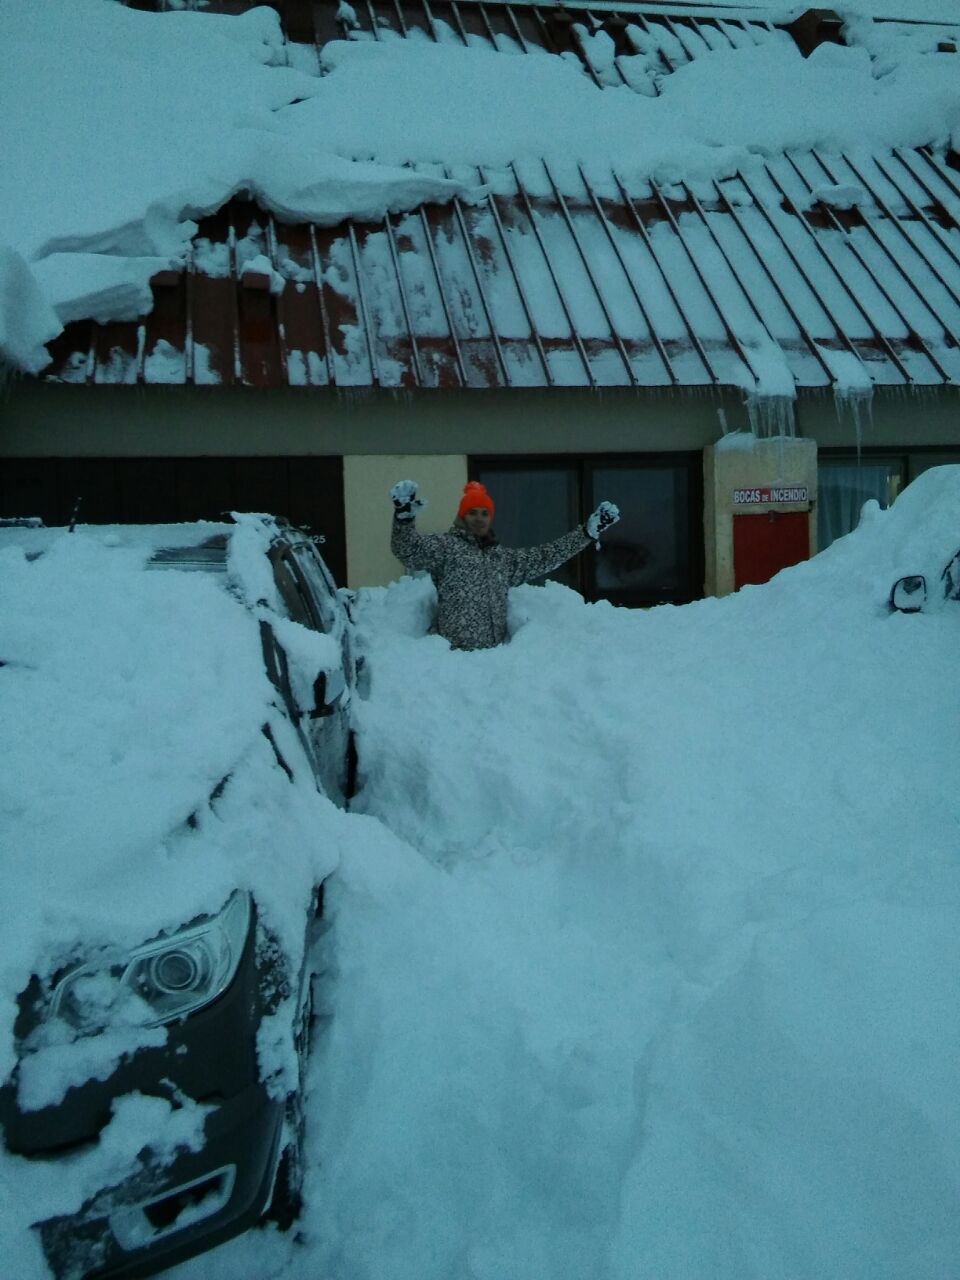 Las Leñas was buried with snow and muche more is on the way!